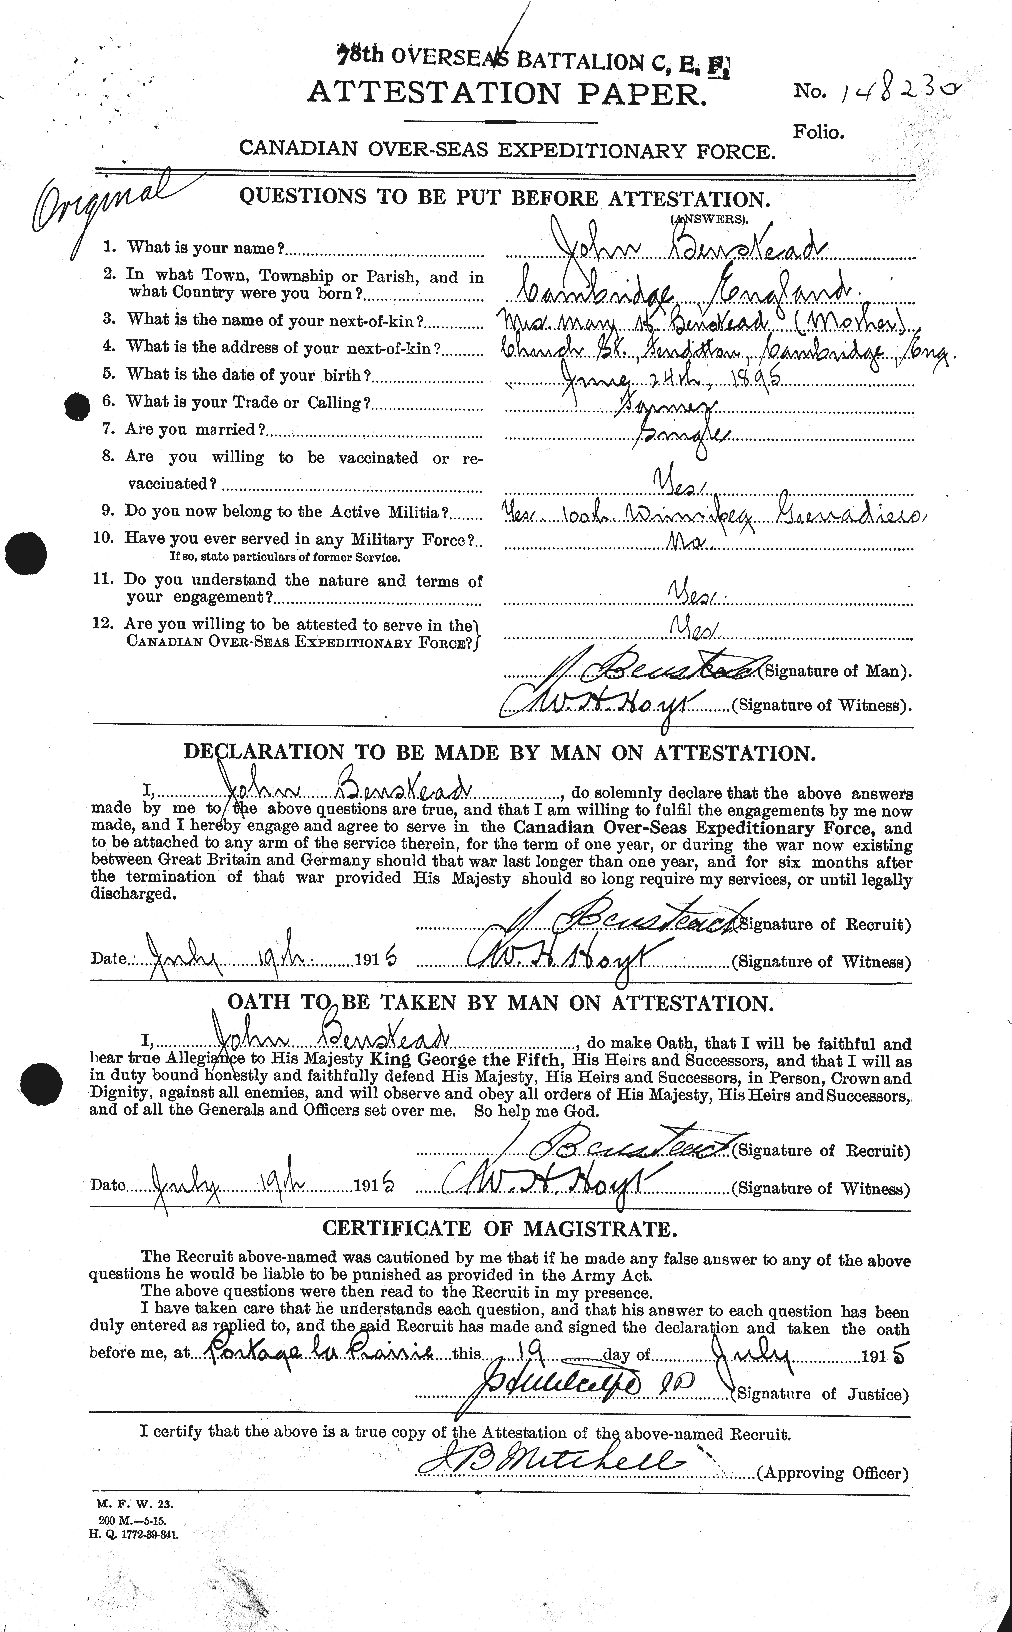 Personnel Records of the First World War - CEF 238054a